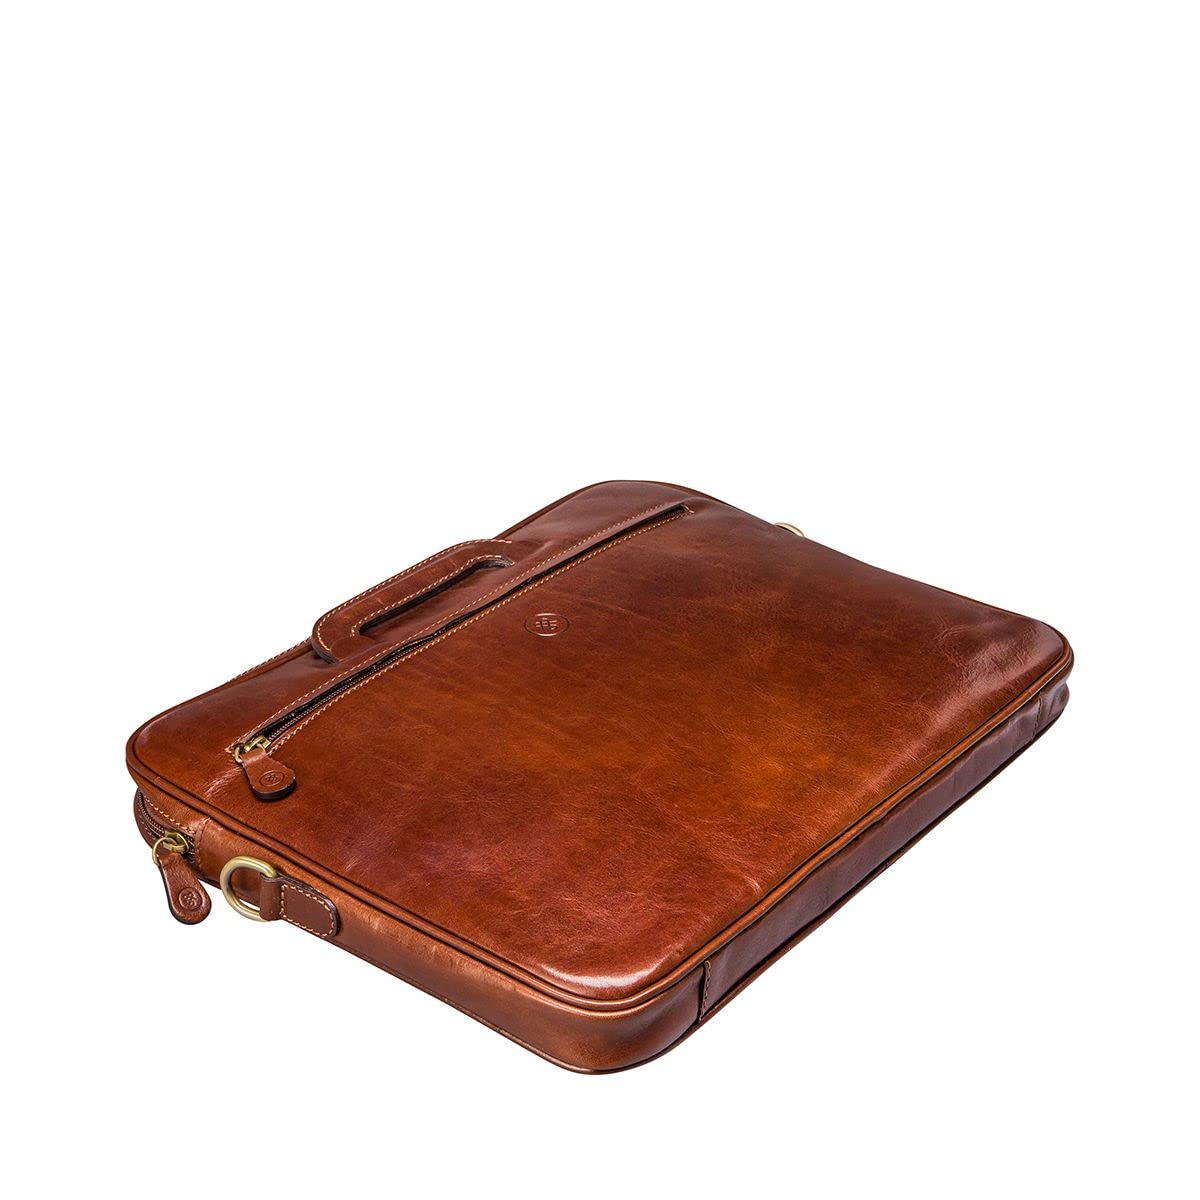 Maxwell Scott | Luxury Leather Document Case | The Tutti | Handmade In Italy